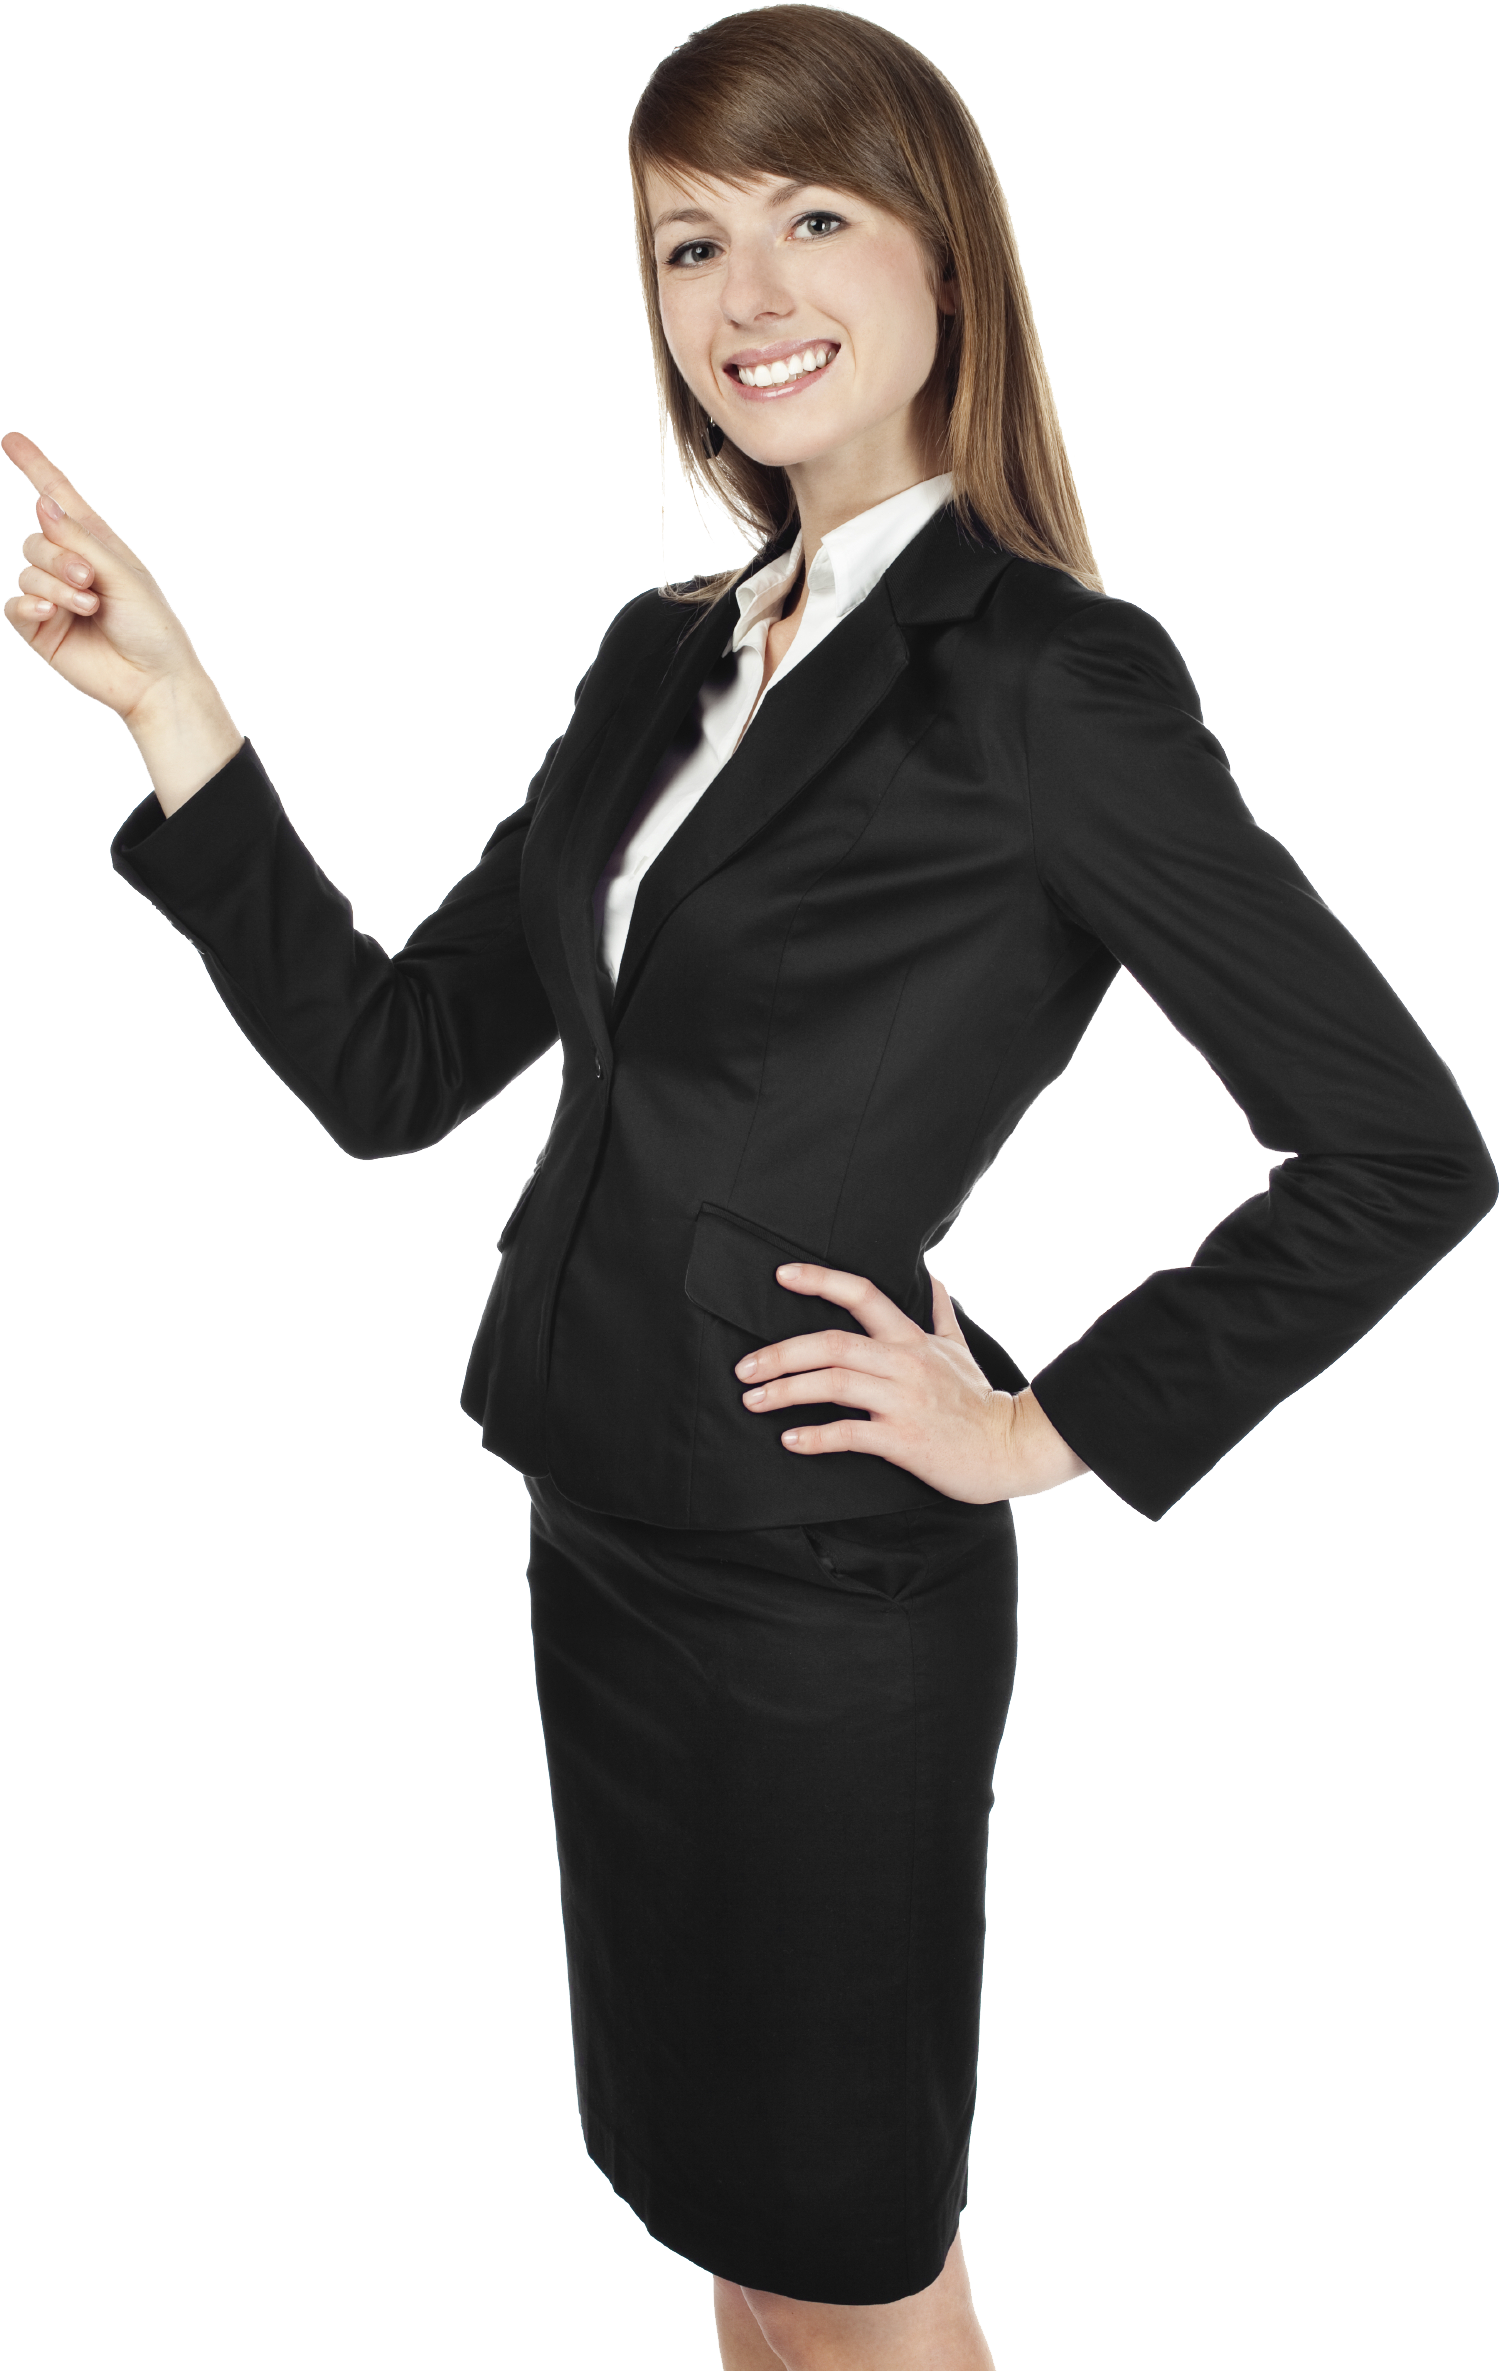 Professional Business Woman PNG Image